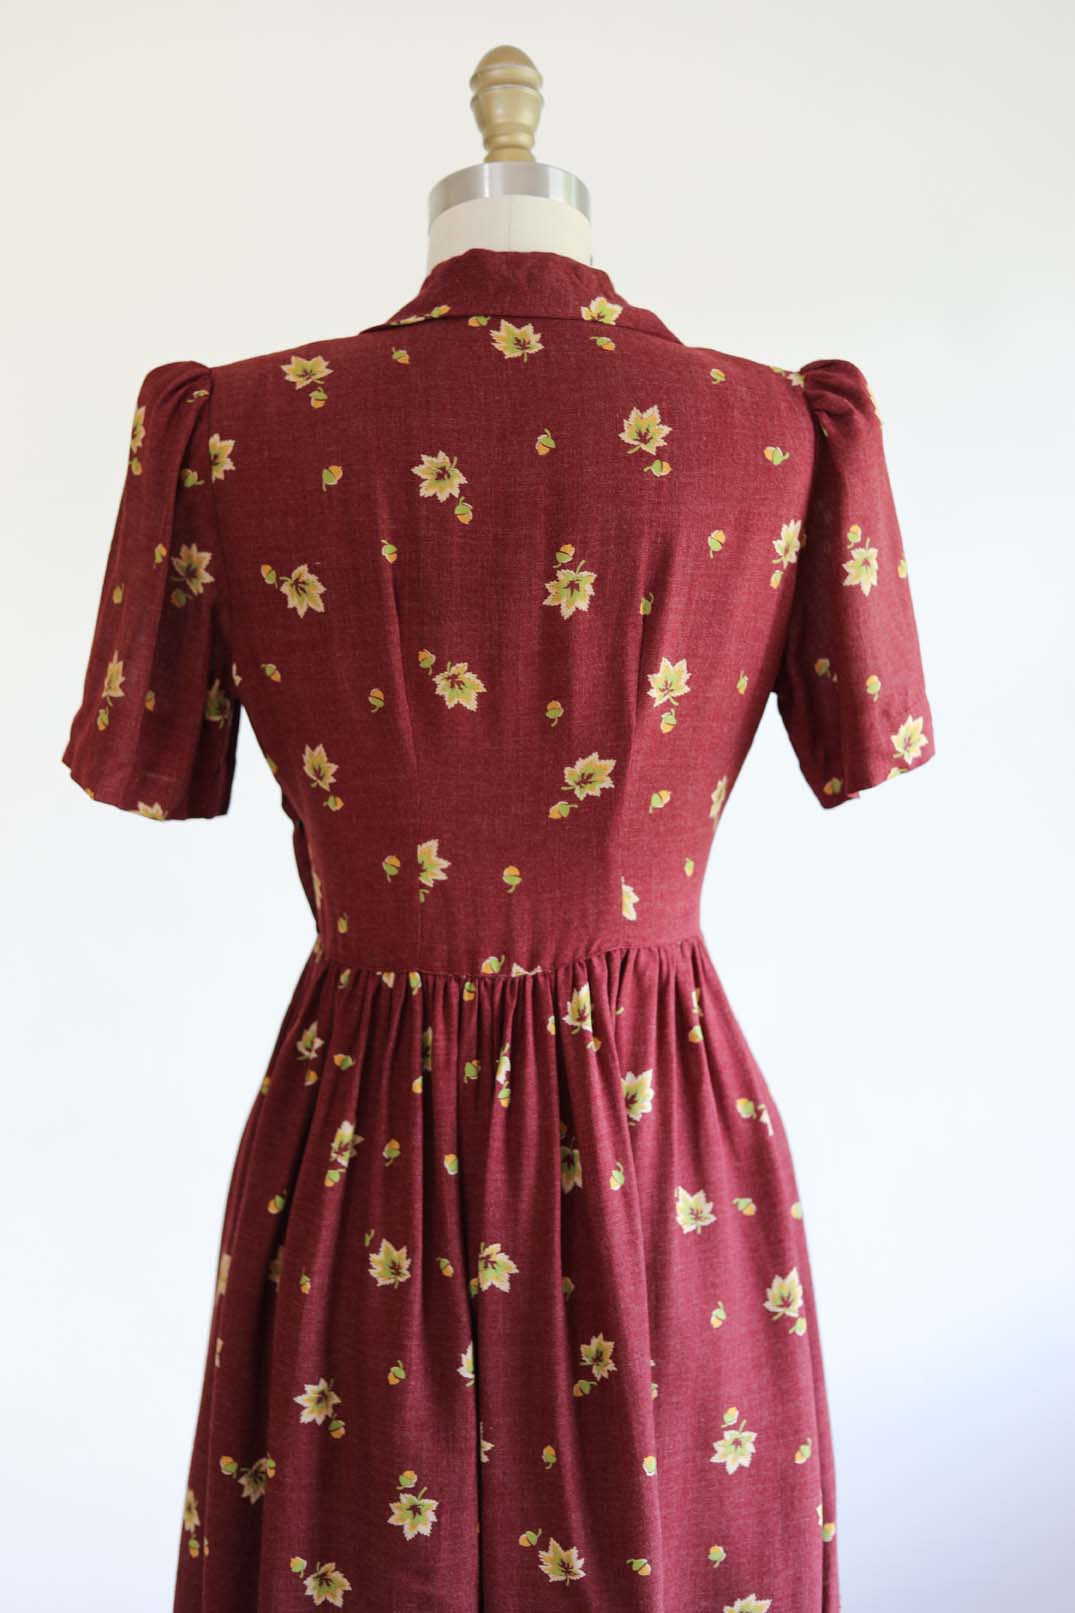 Vintage 1930s Dress - SUPER CUTE & AS-IS Novelty Puff Sleeve Raisin-Hued Rayon Junior's Frock w Oak Leaves + Acorns Size S to M